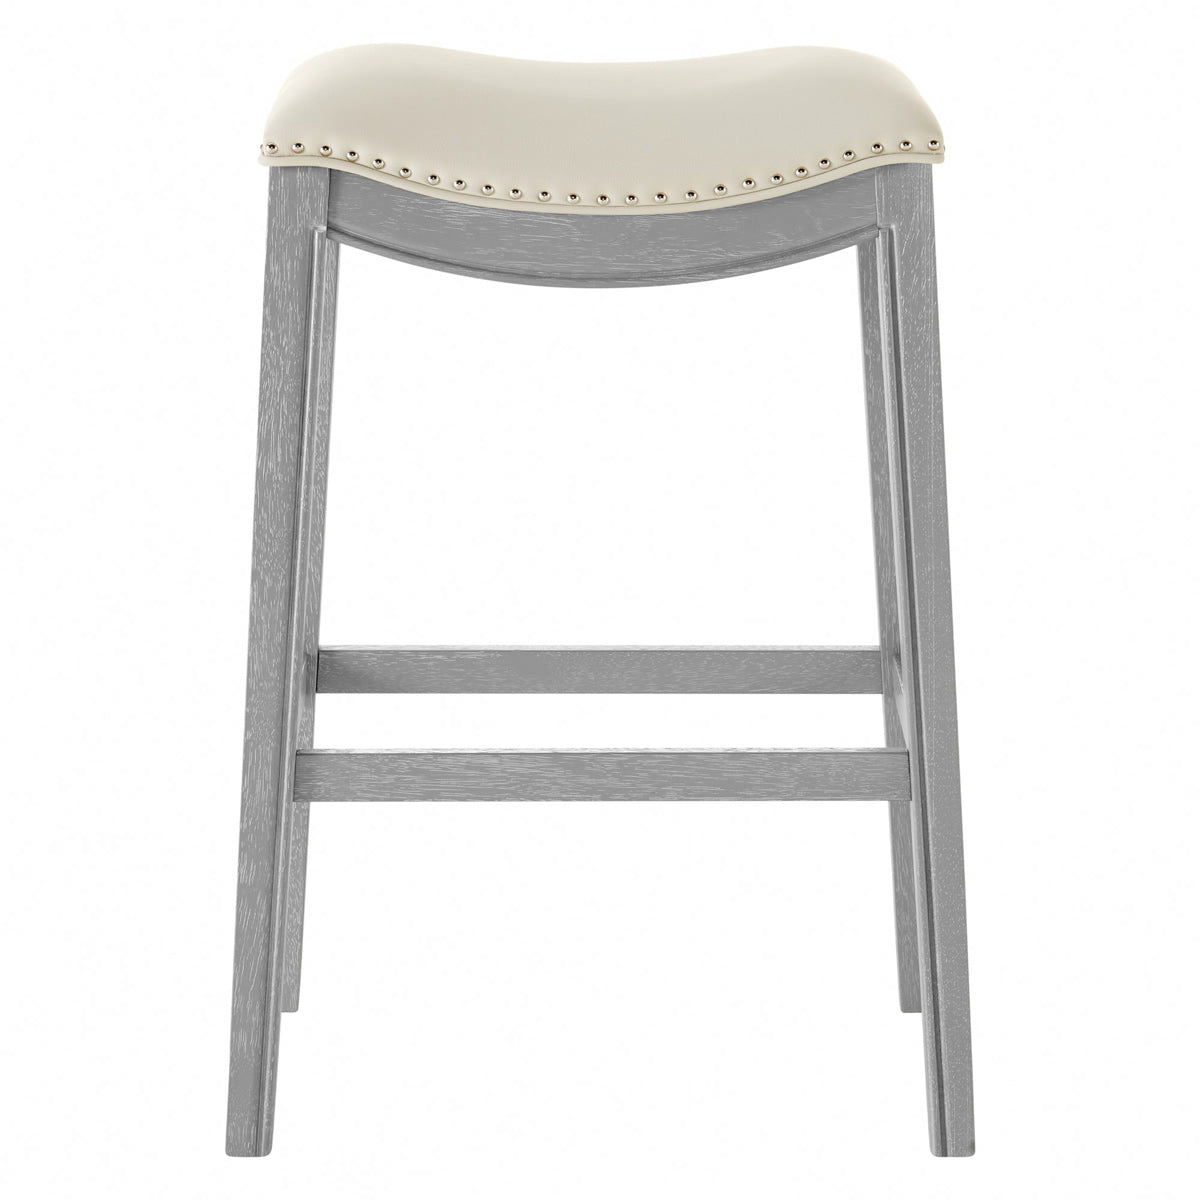 Grover PU Leather Bar Stool by New Pacific Direct - 1330003-386